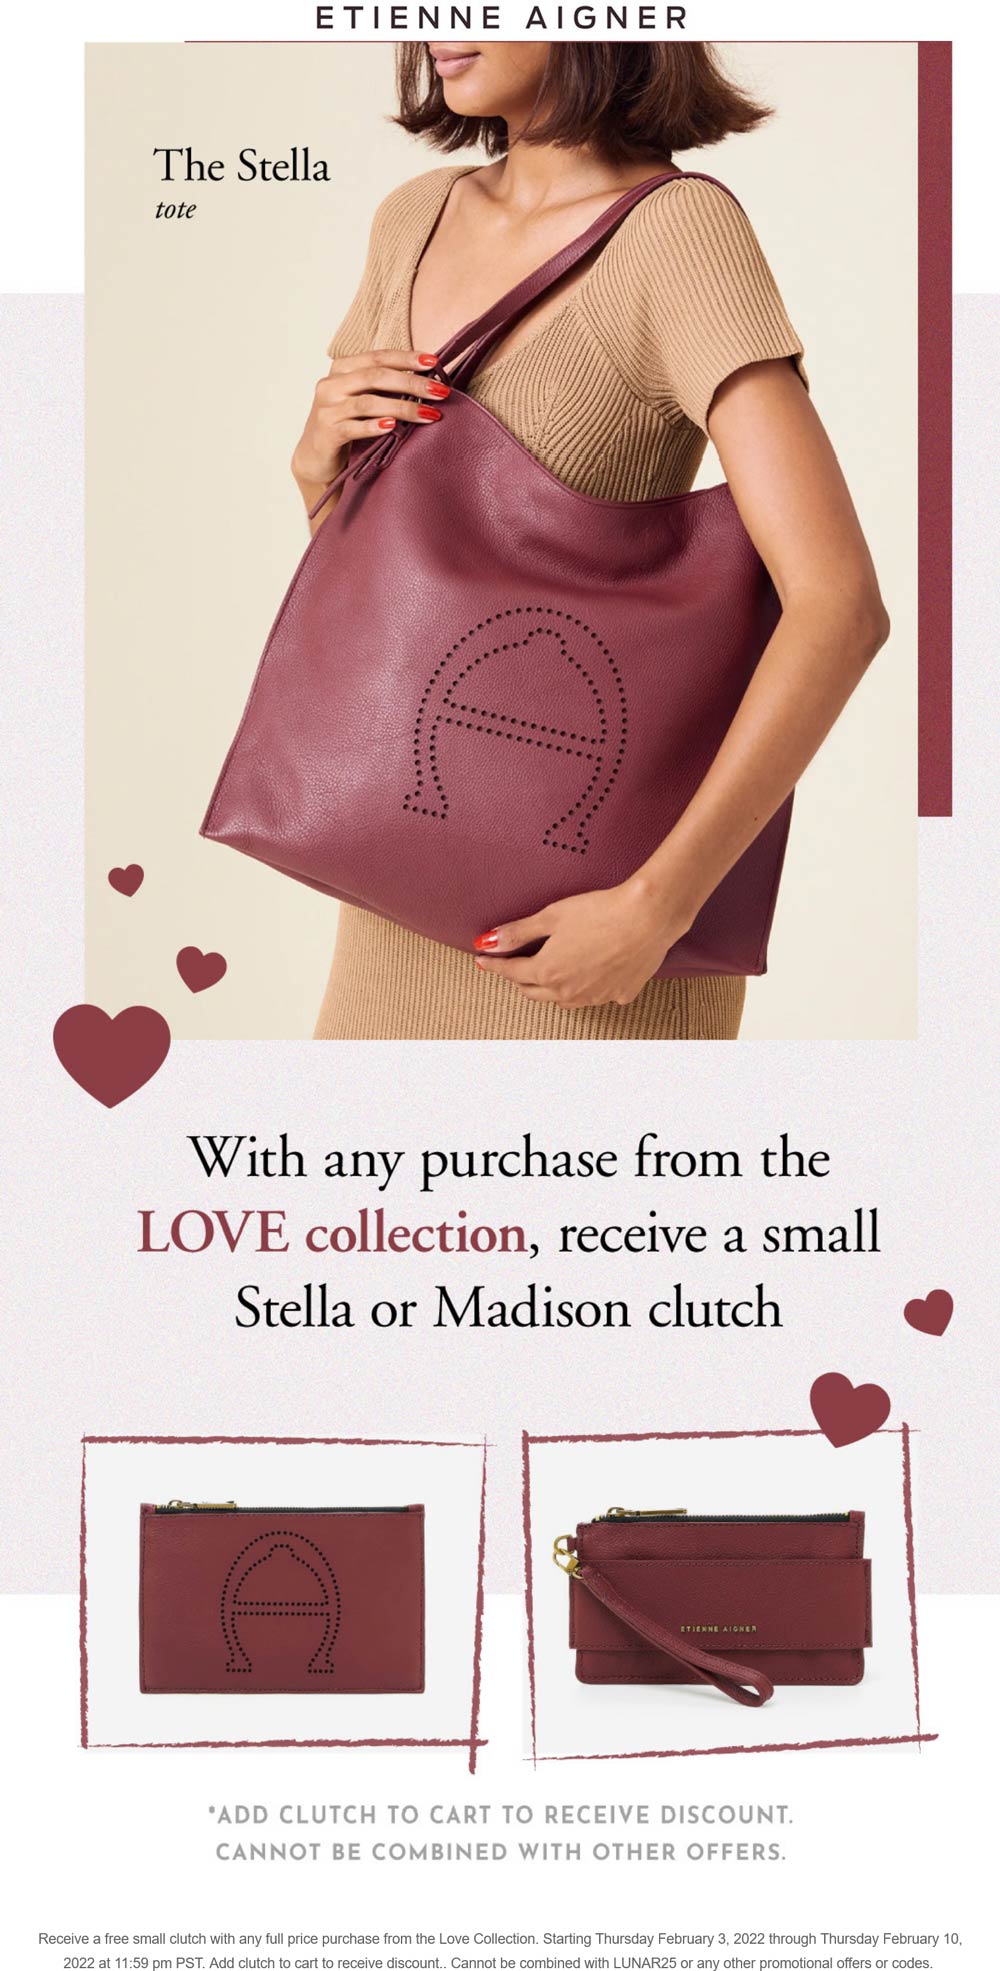 Etienne Aigner stores Coupon  Free clutch with Love collection purchase online at Etienne Aigner #etienneaigner 